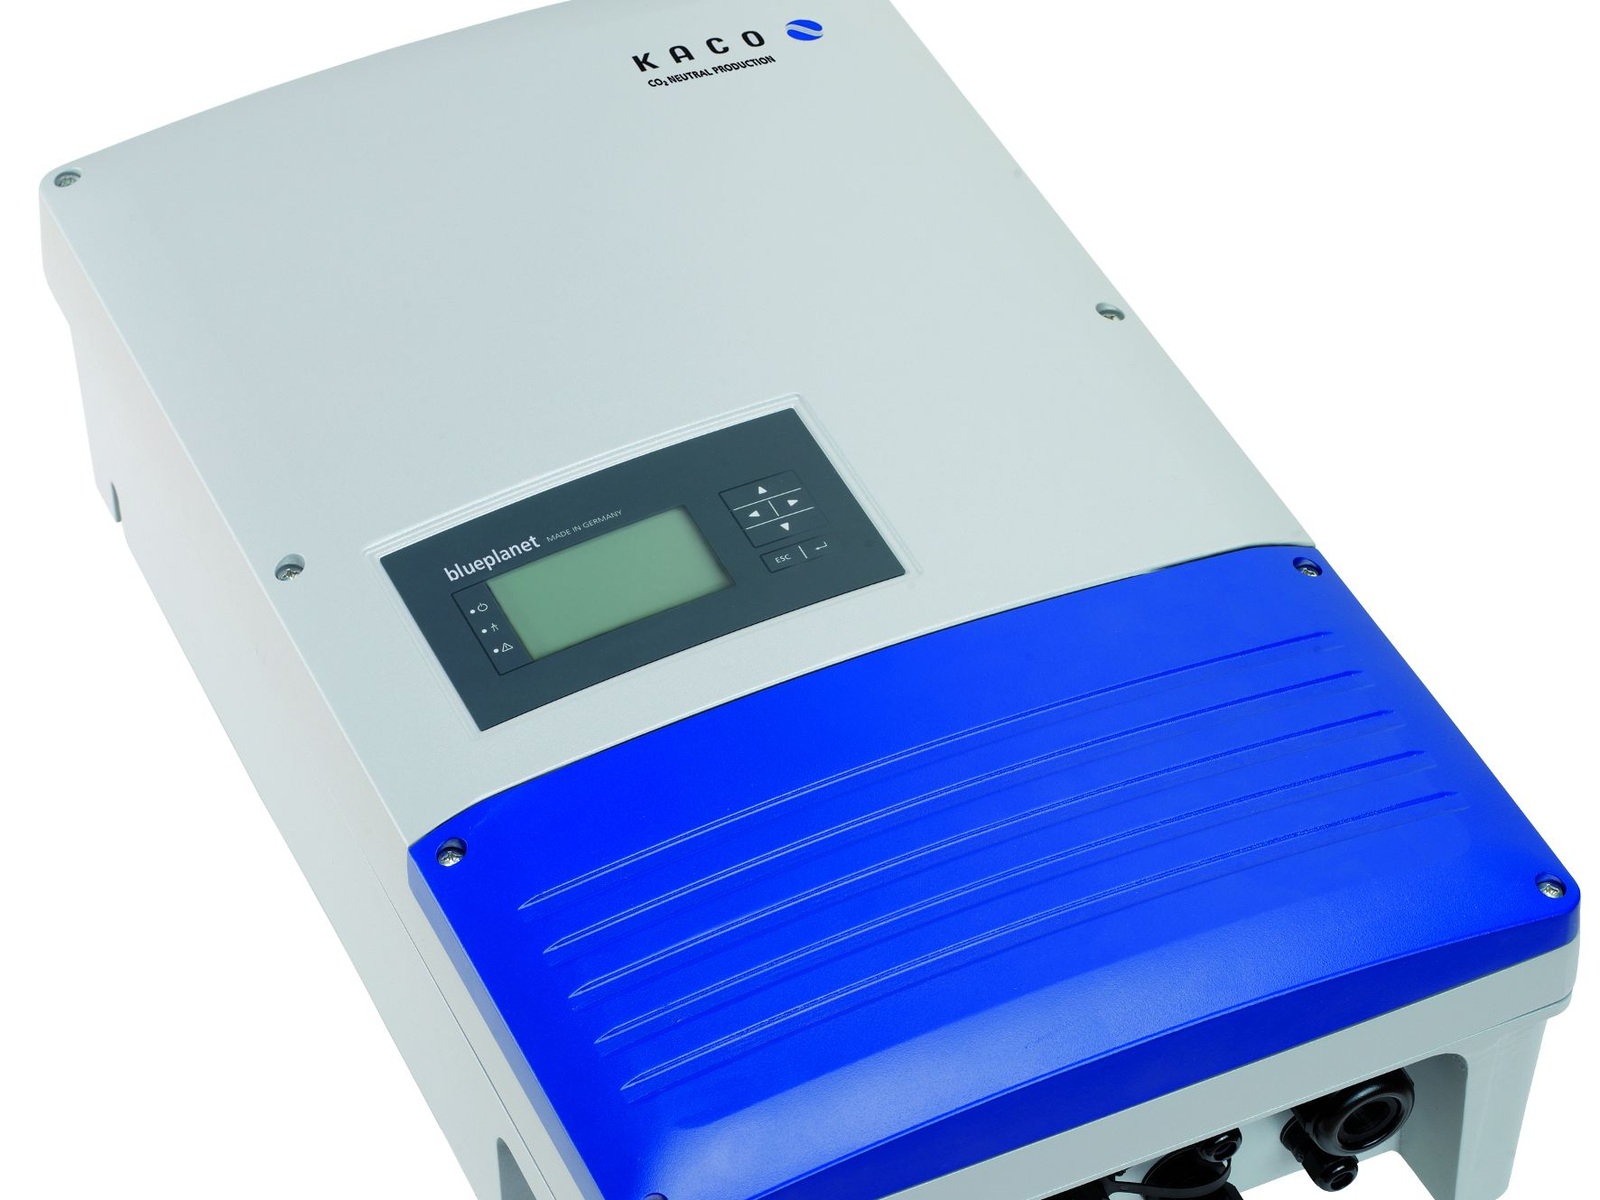 Kaco New Energy equips inverters with additional safety function pv Europe